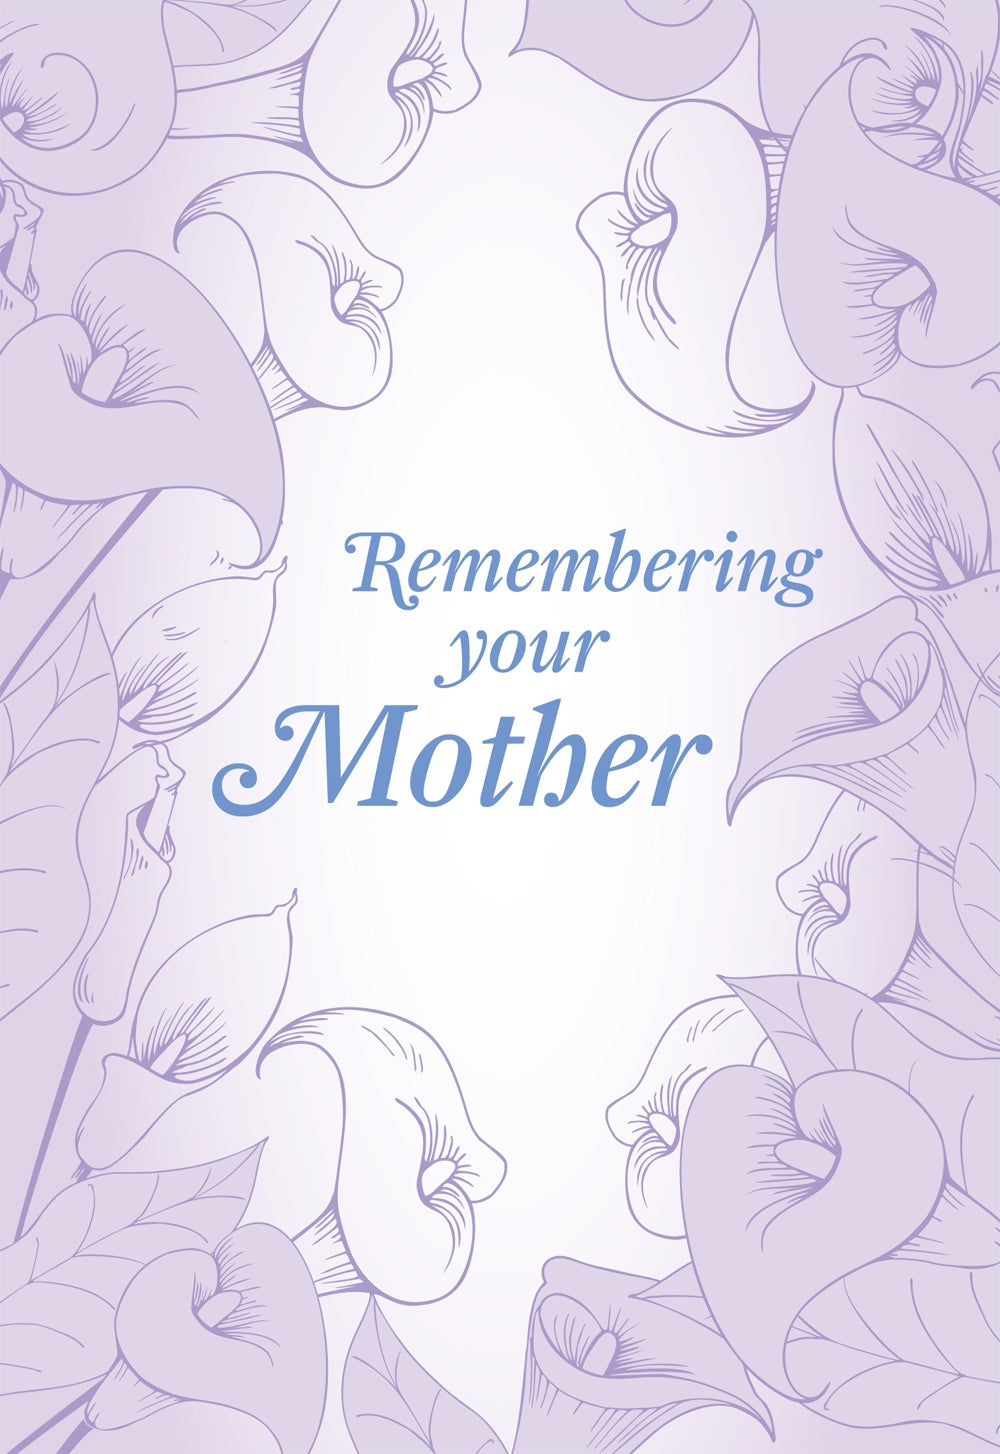 Remembering Your Mother - Lillies Std Card Gloss (6 Pack)Remembering Your Mother - Lillies Std Card Gloss (6 Pack)